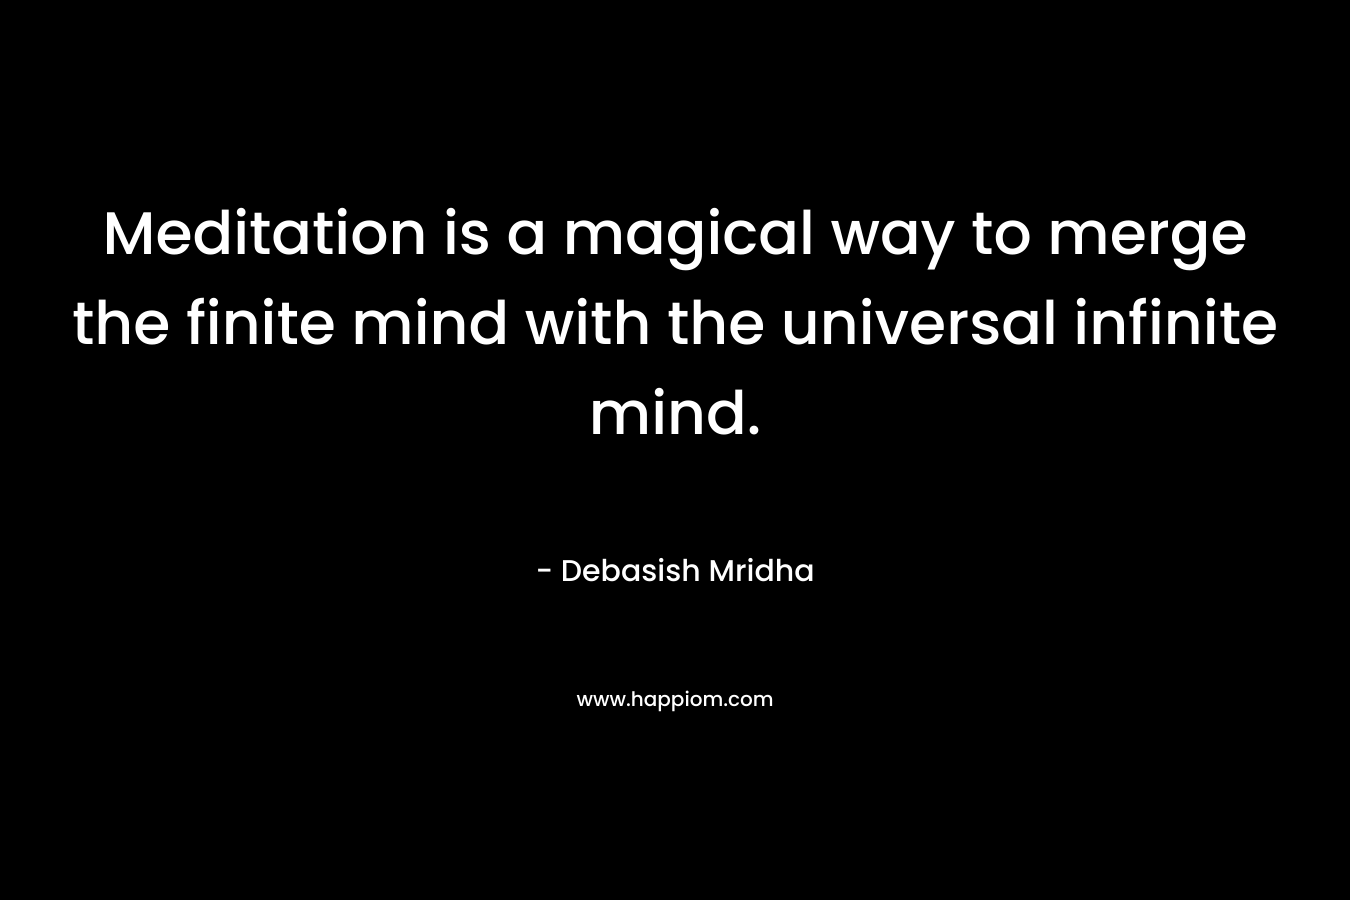 Meditation is a magical way to merge the finite mind with the universal infinite mind. – Debasish Mridha